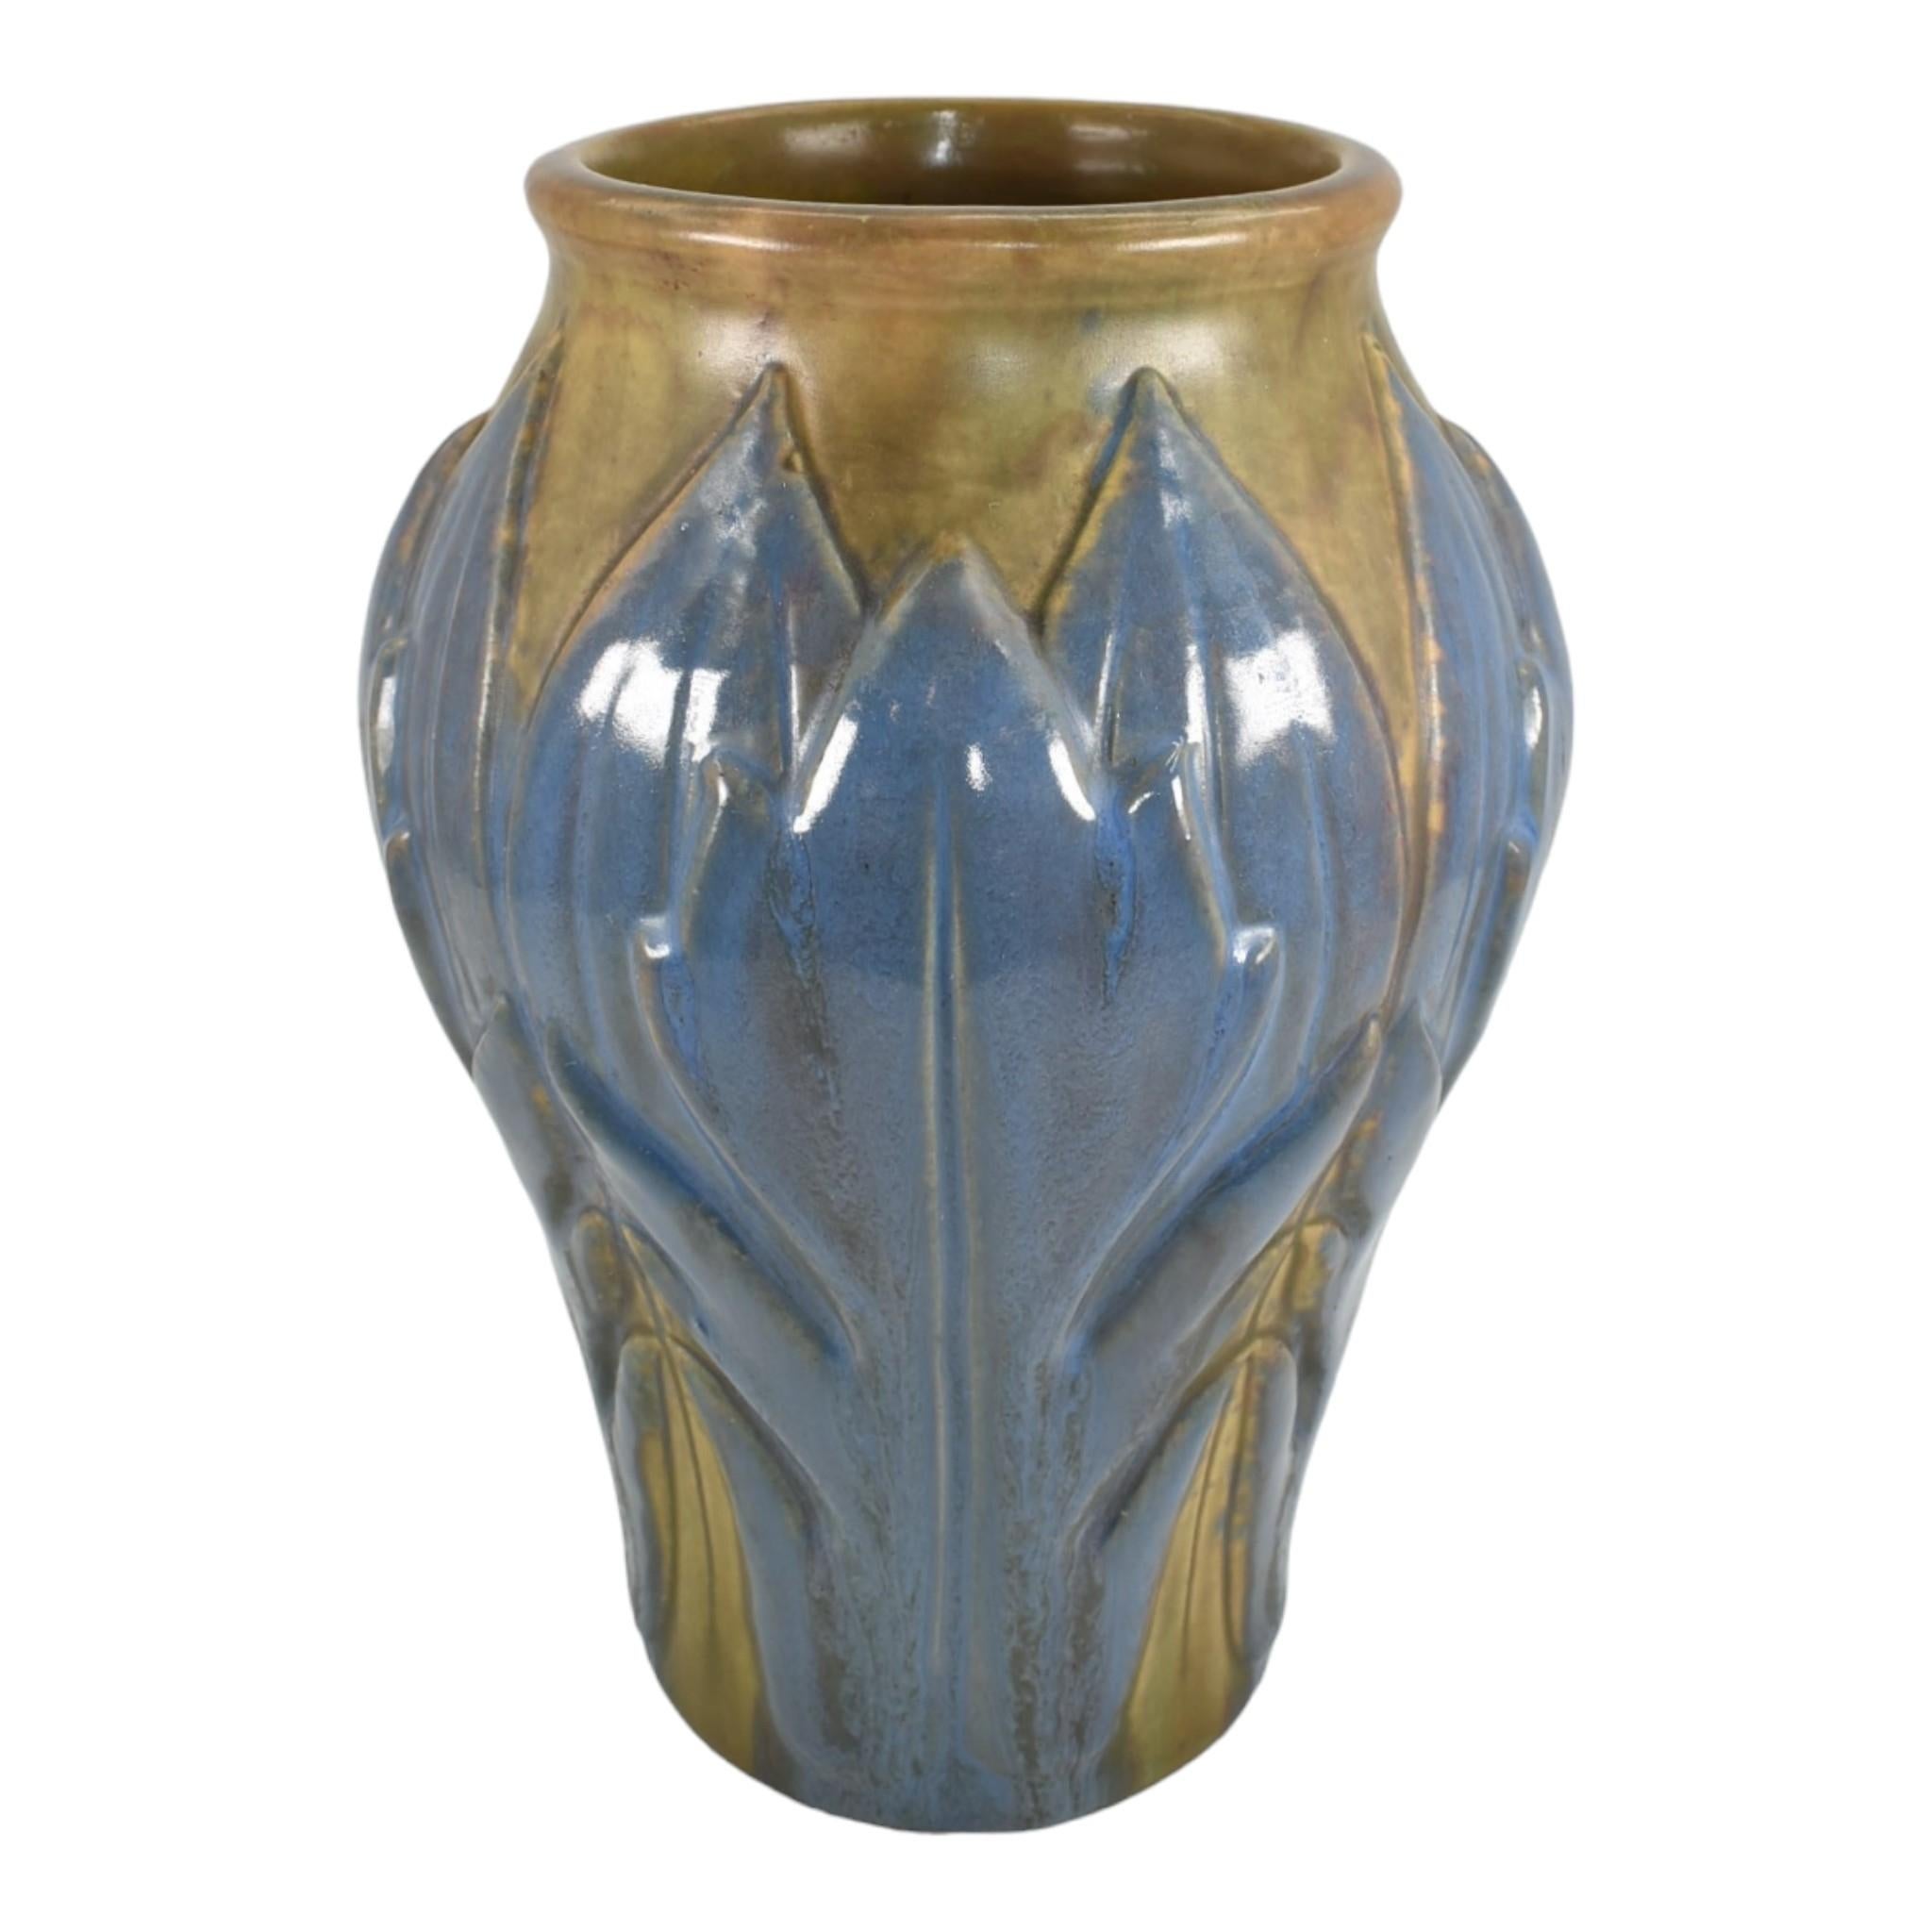 Roseville Early Velmoss Trial Glaze 1916 Vintage Art Pottery Ceramic Vase 135-10 In Good Condition For Sale In East Peoria, IL